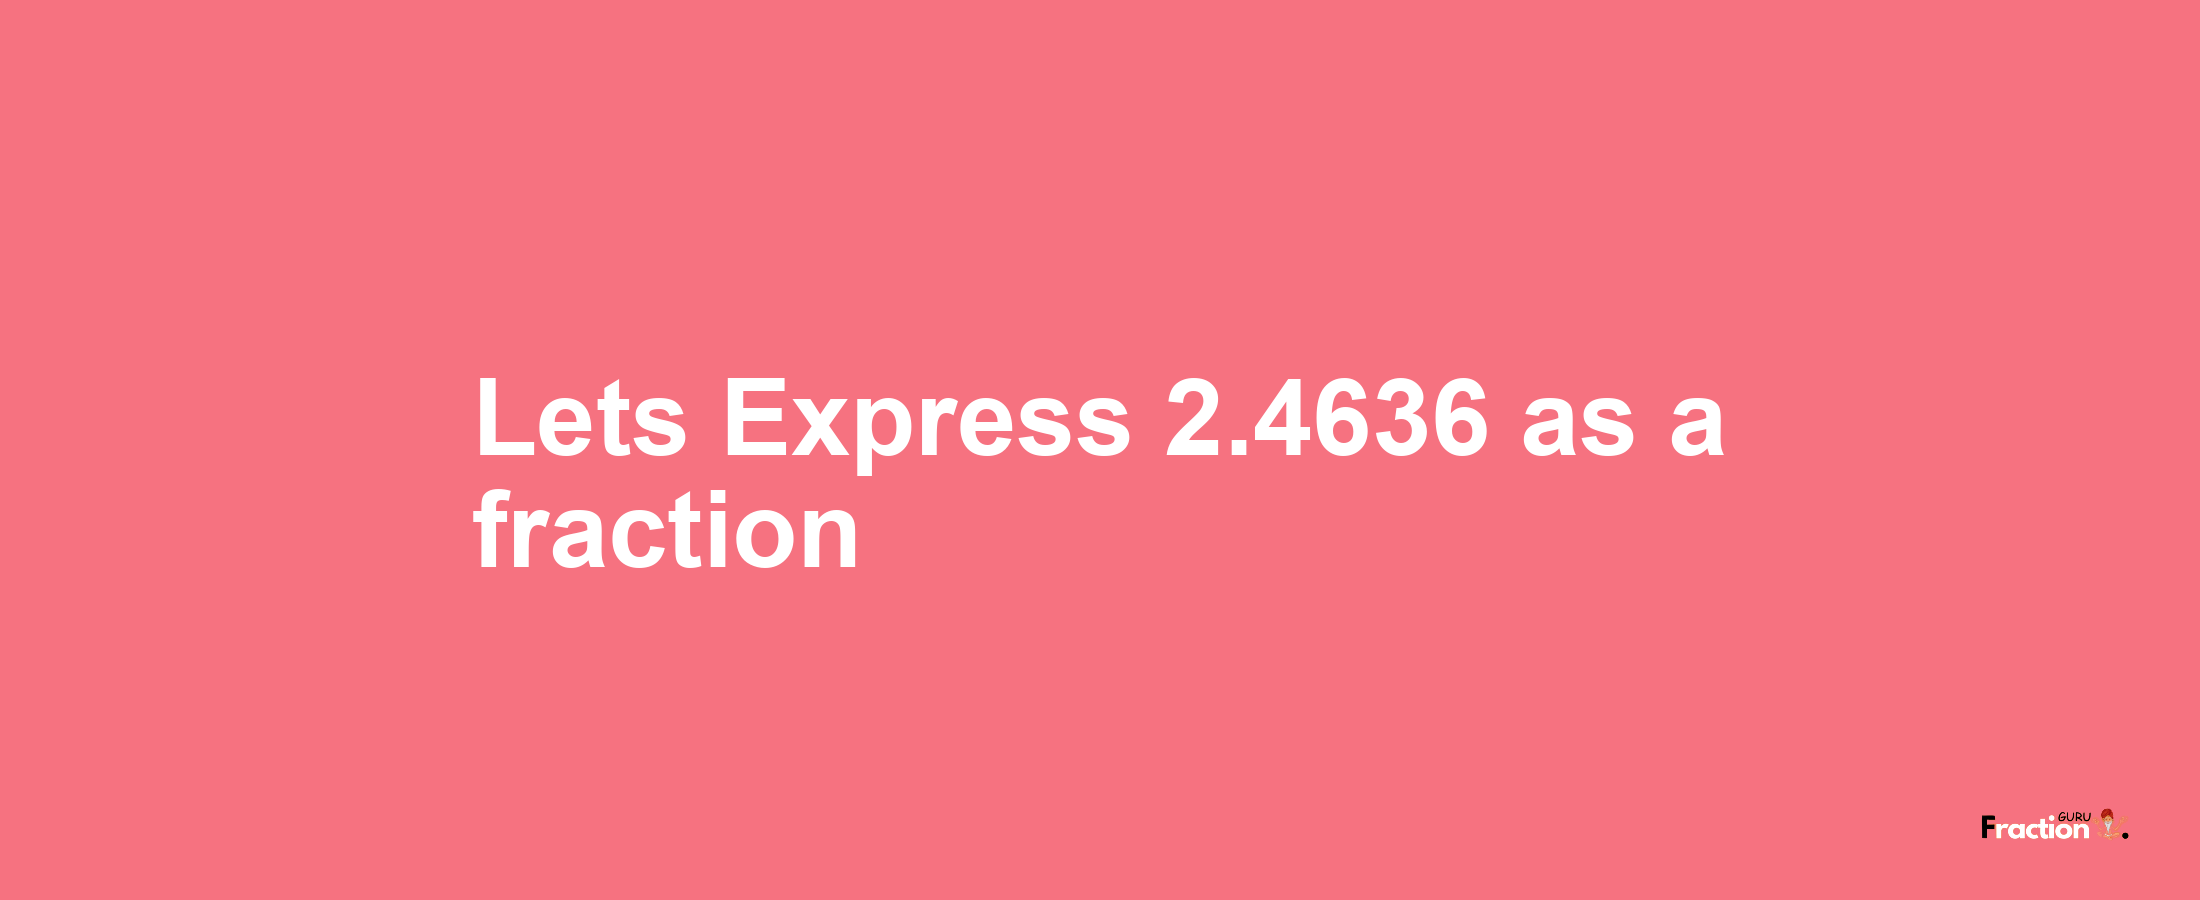 Lets Express 2.4636 as afraction